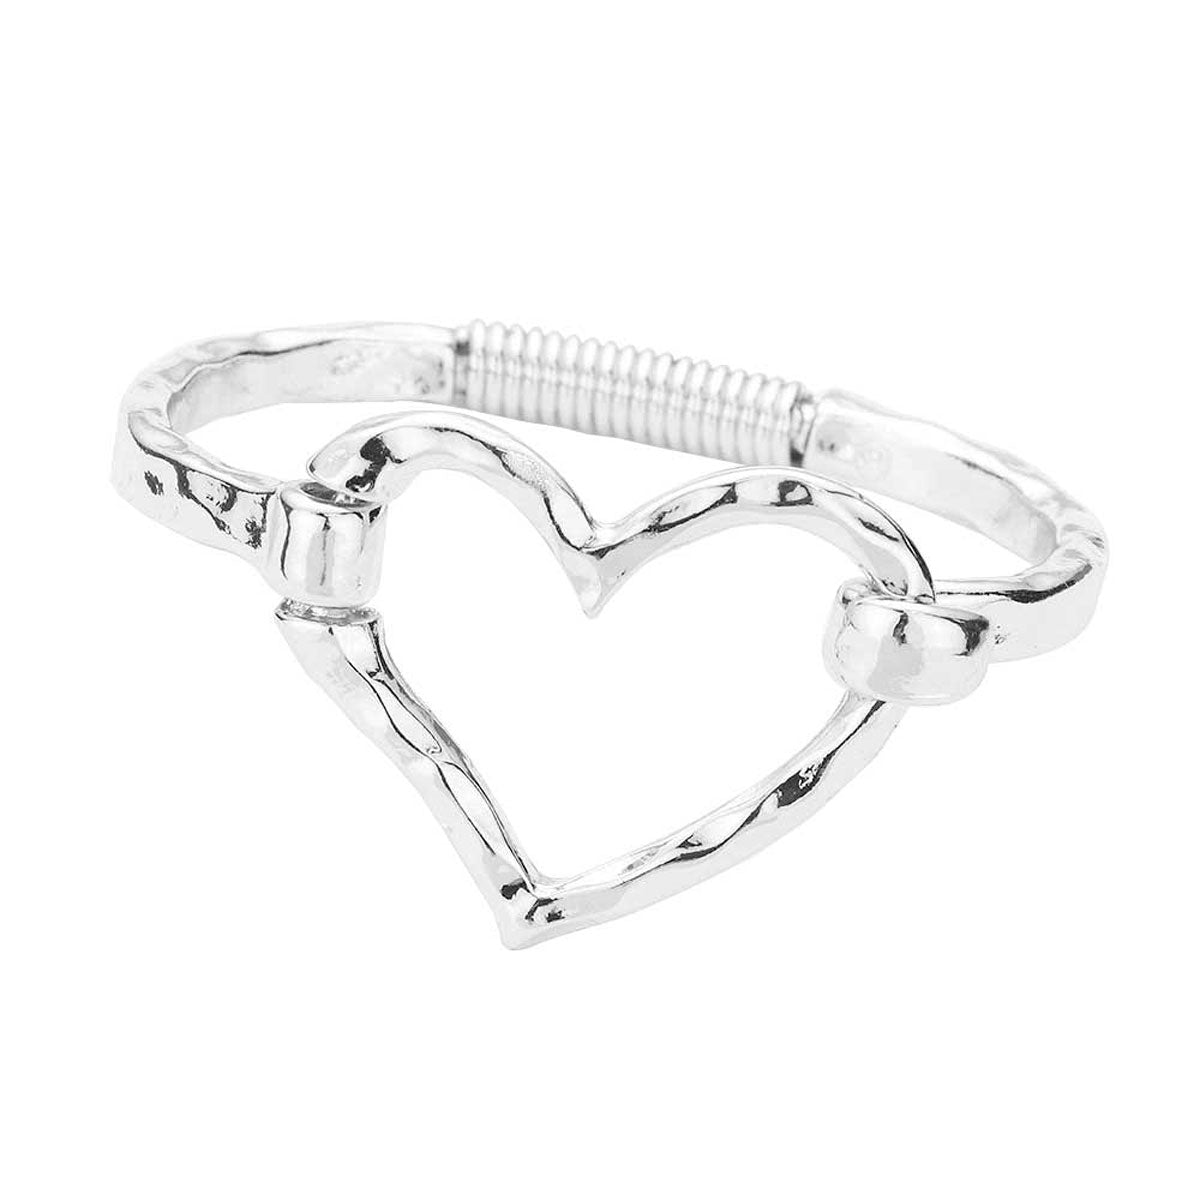 Rhodium Open Metal Heart Hook Bracelet. These Metal  bracelets are easy to put on, take off and so comfortable for daily wear. Pair these with tee and jeans and you are good to go. It will be your new favourite go-to accessory. Perfect Birthday gift, friendship day, Mother's Day, Graduation Gift or any other Special occasion.